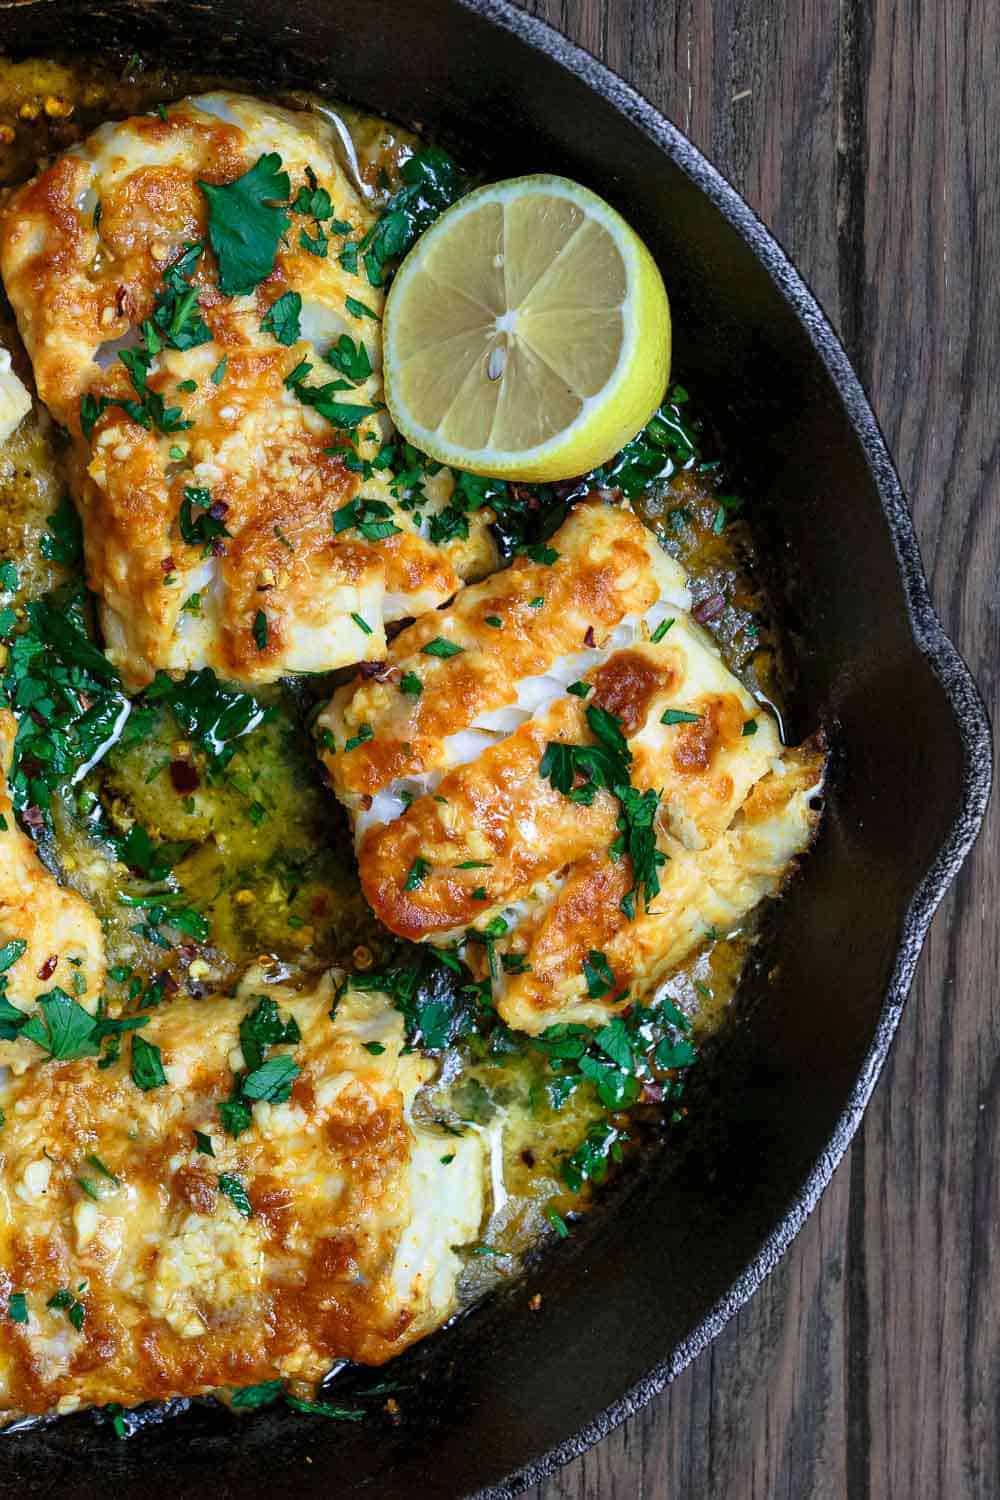 Easy Baked Cod Recipe with Lemon and Garlic